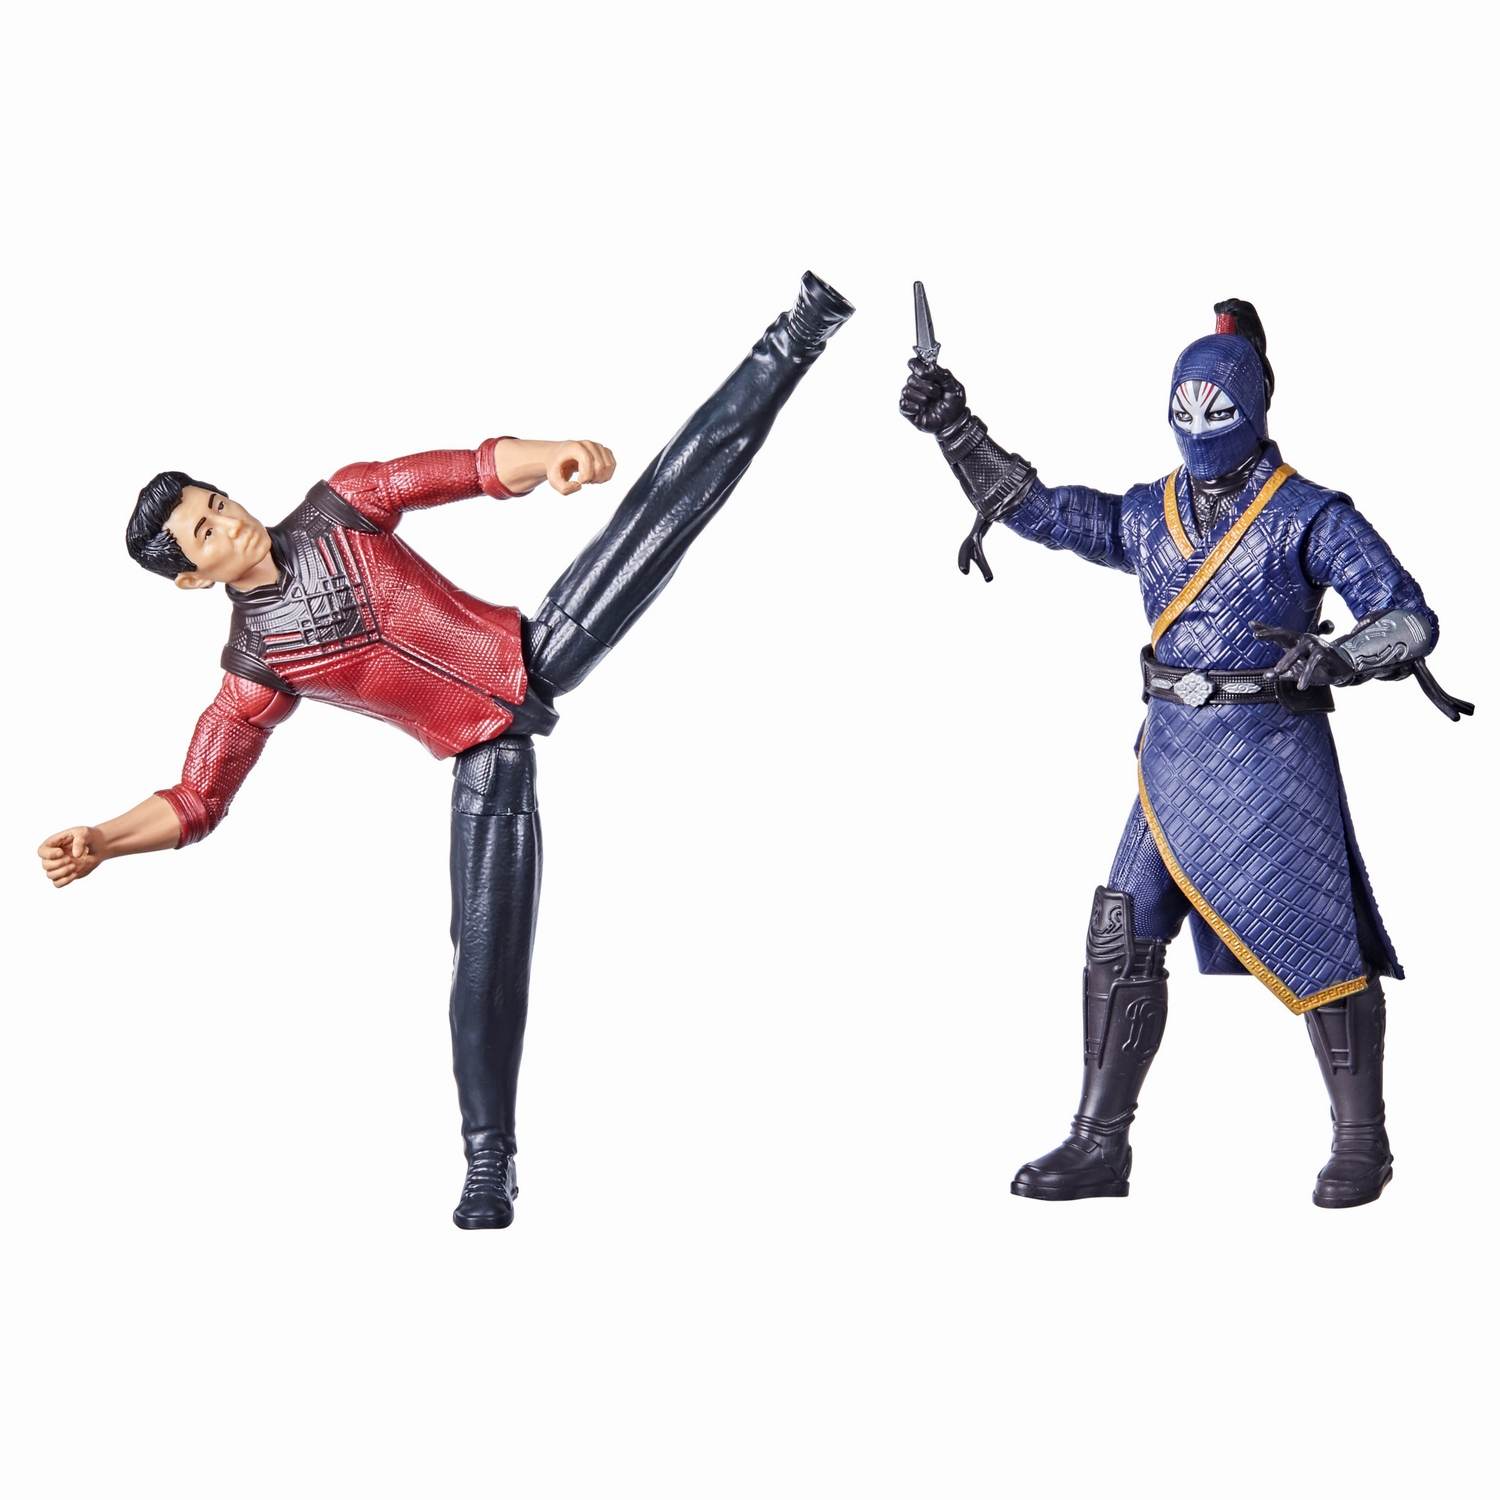 MARVEL SHANG-CHI AND THE LEGEND OF THE TEN RINGS 6-INCH BATTLE PACK Figures - oop (1).jpg